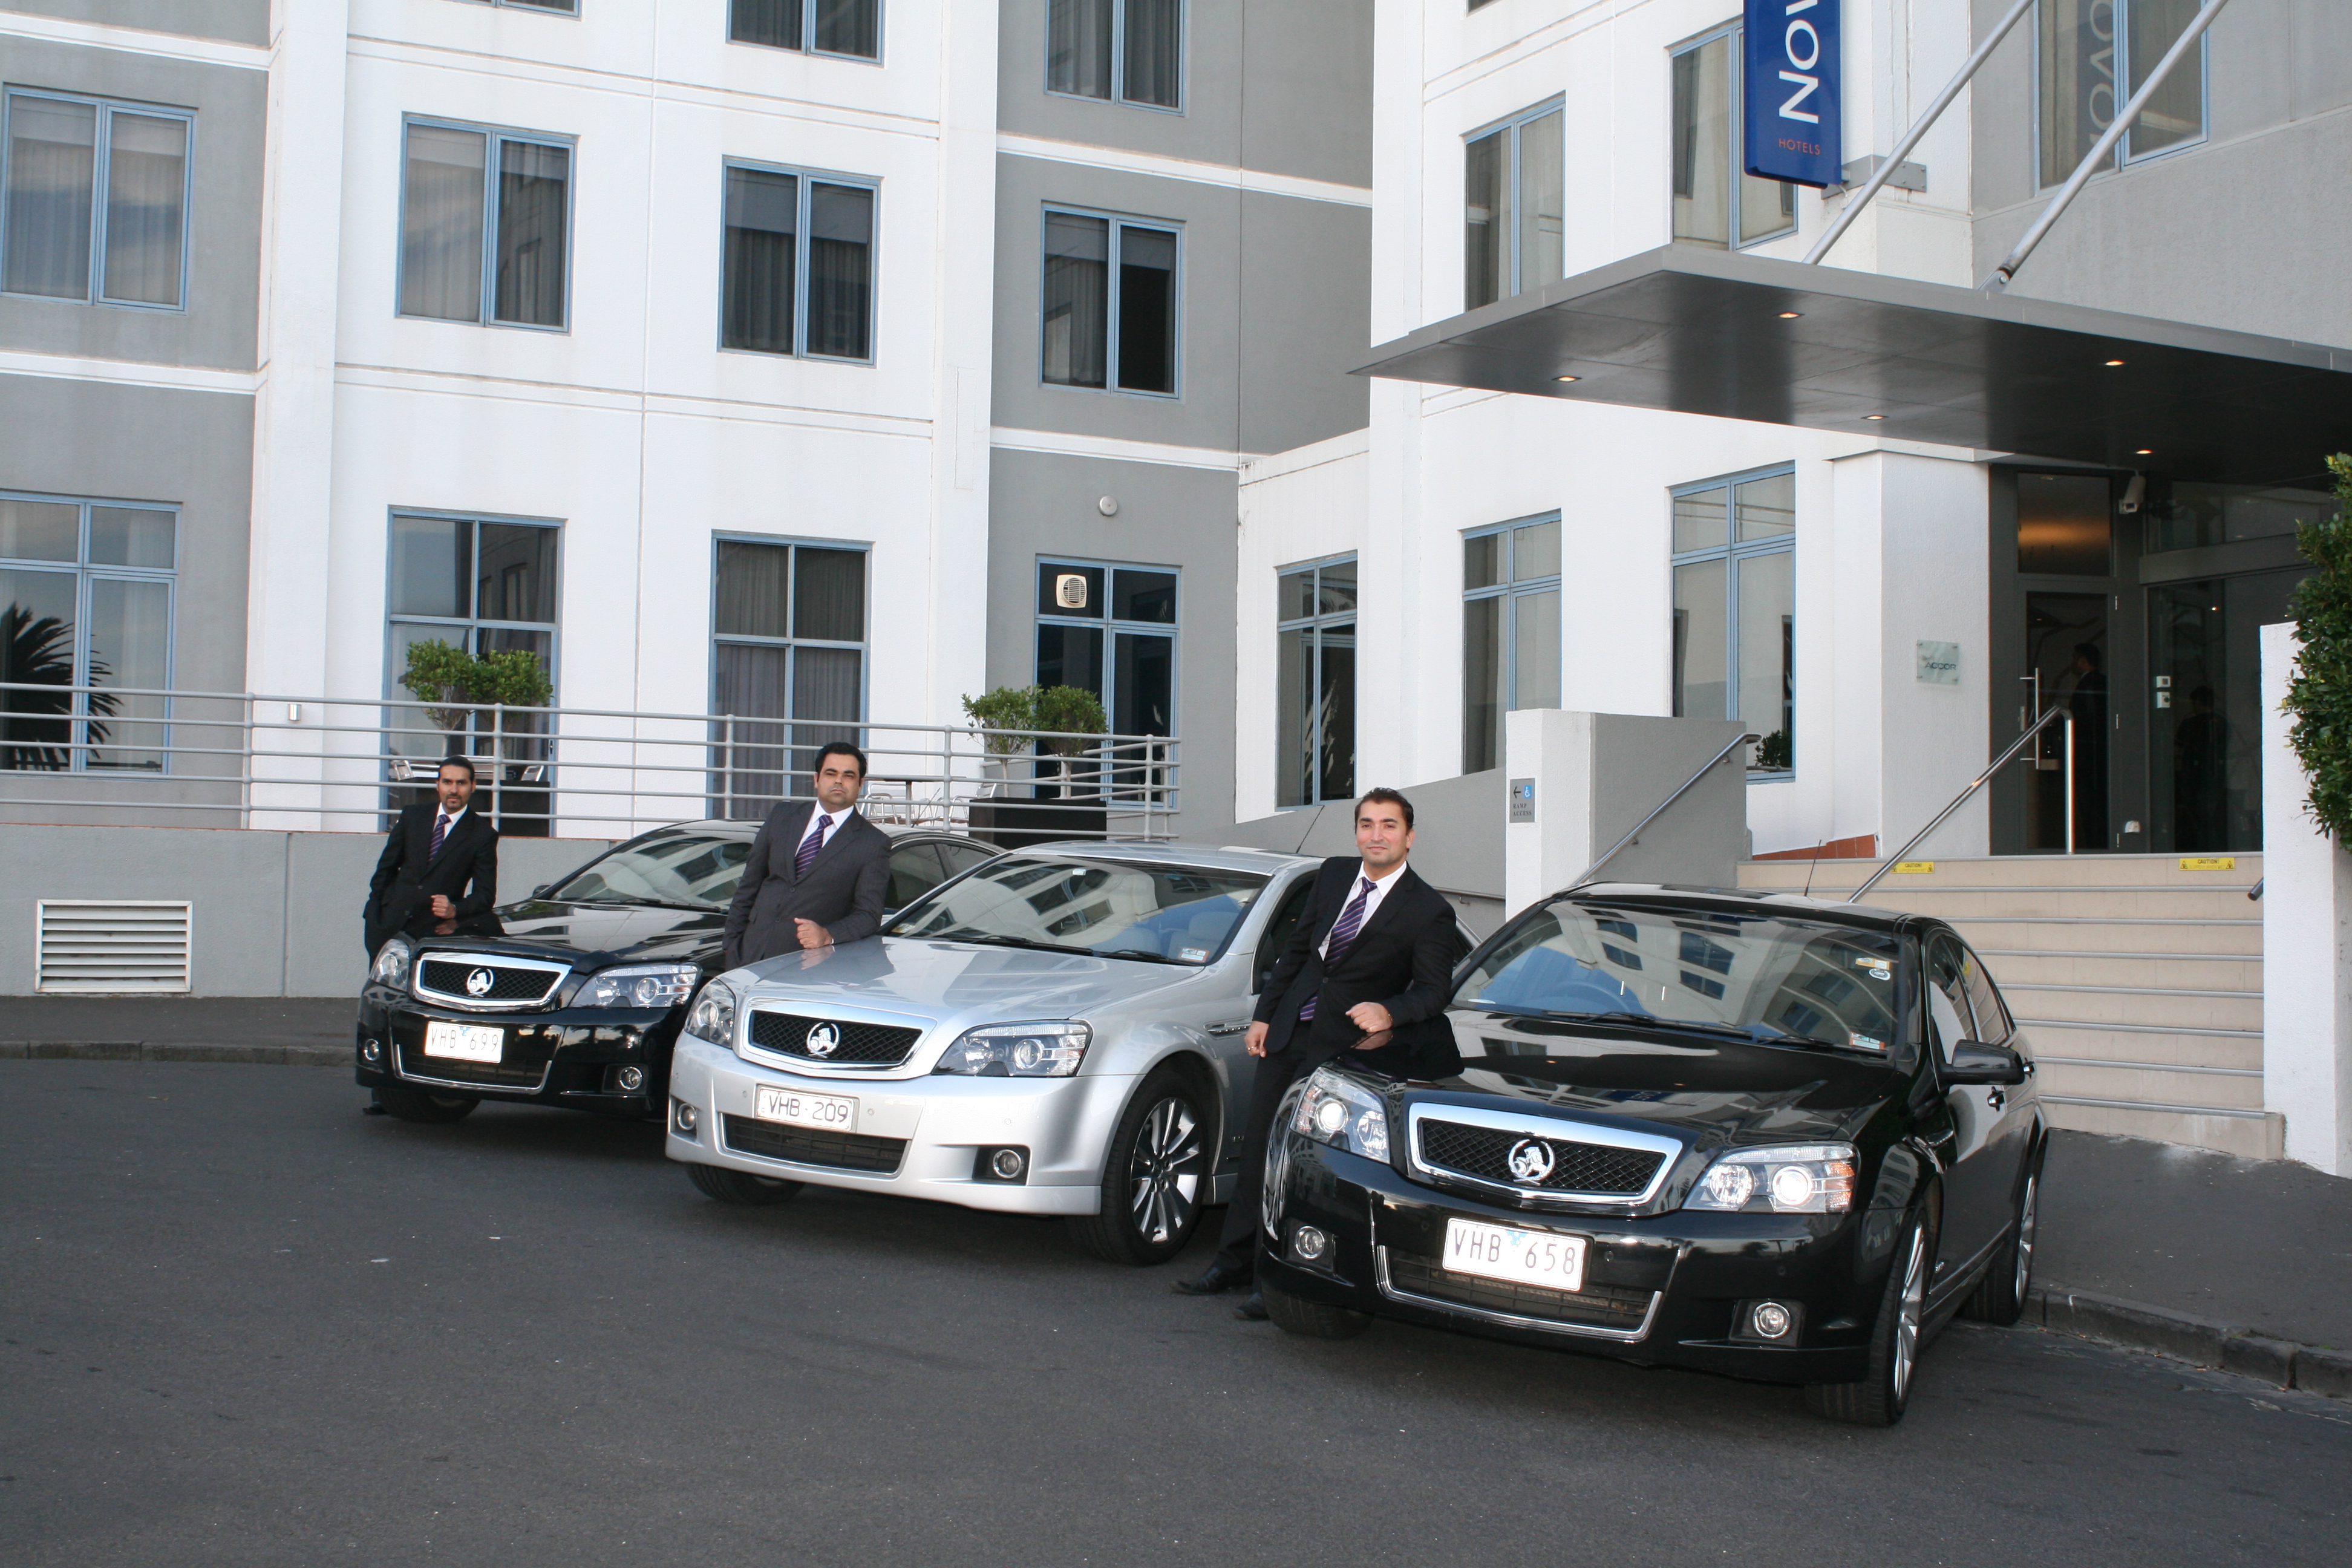 Chauffeur Cars Services In Melbourne Chauffeur Melbourne Luxury